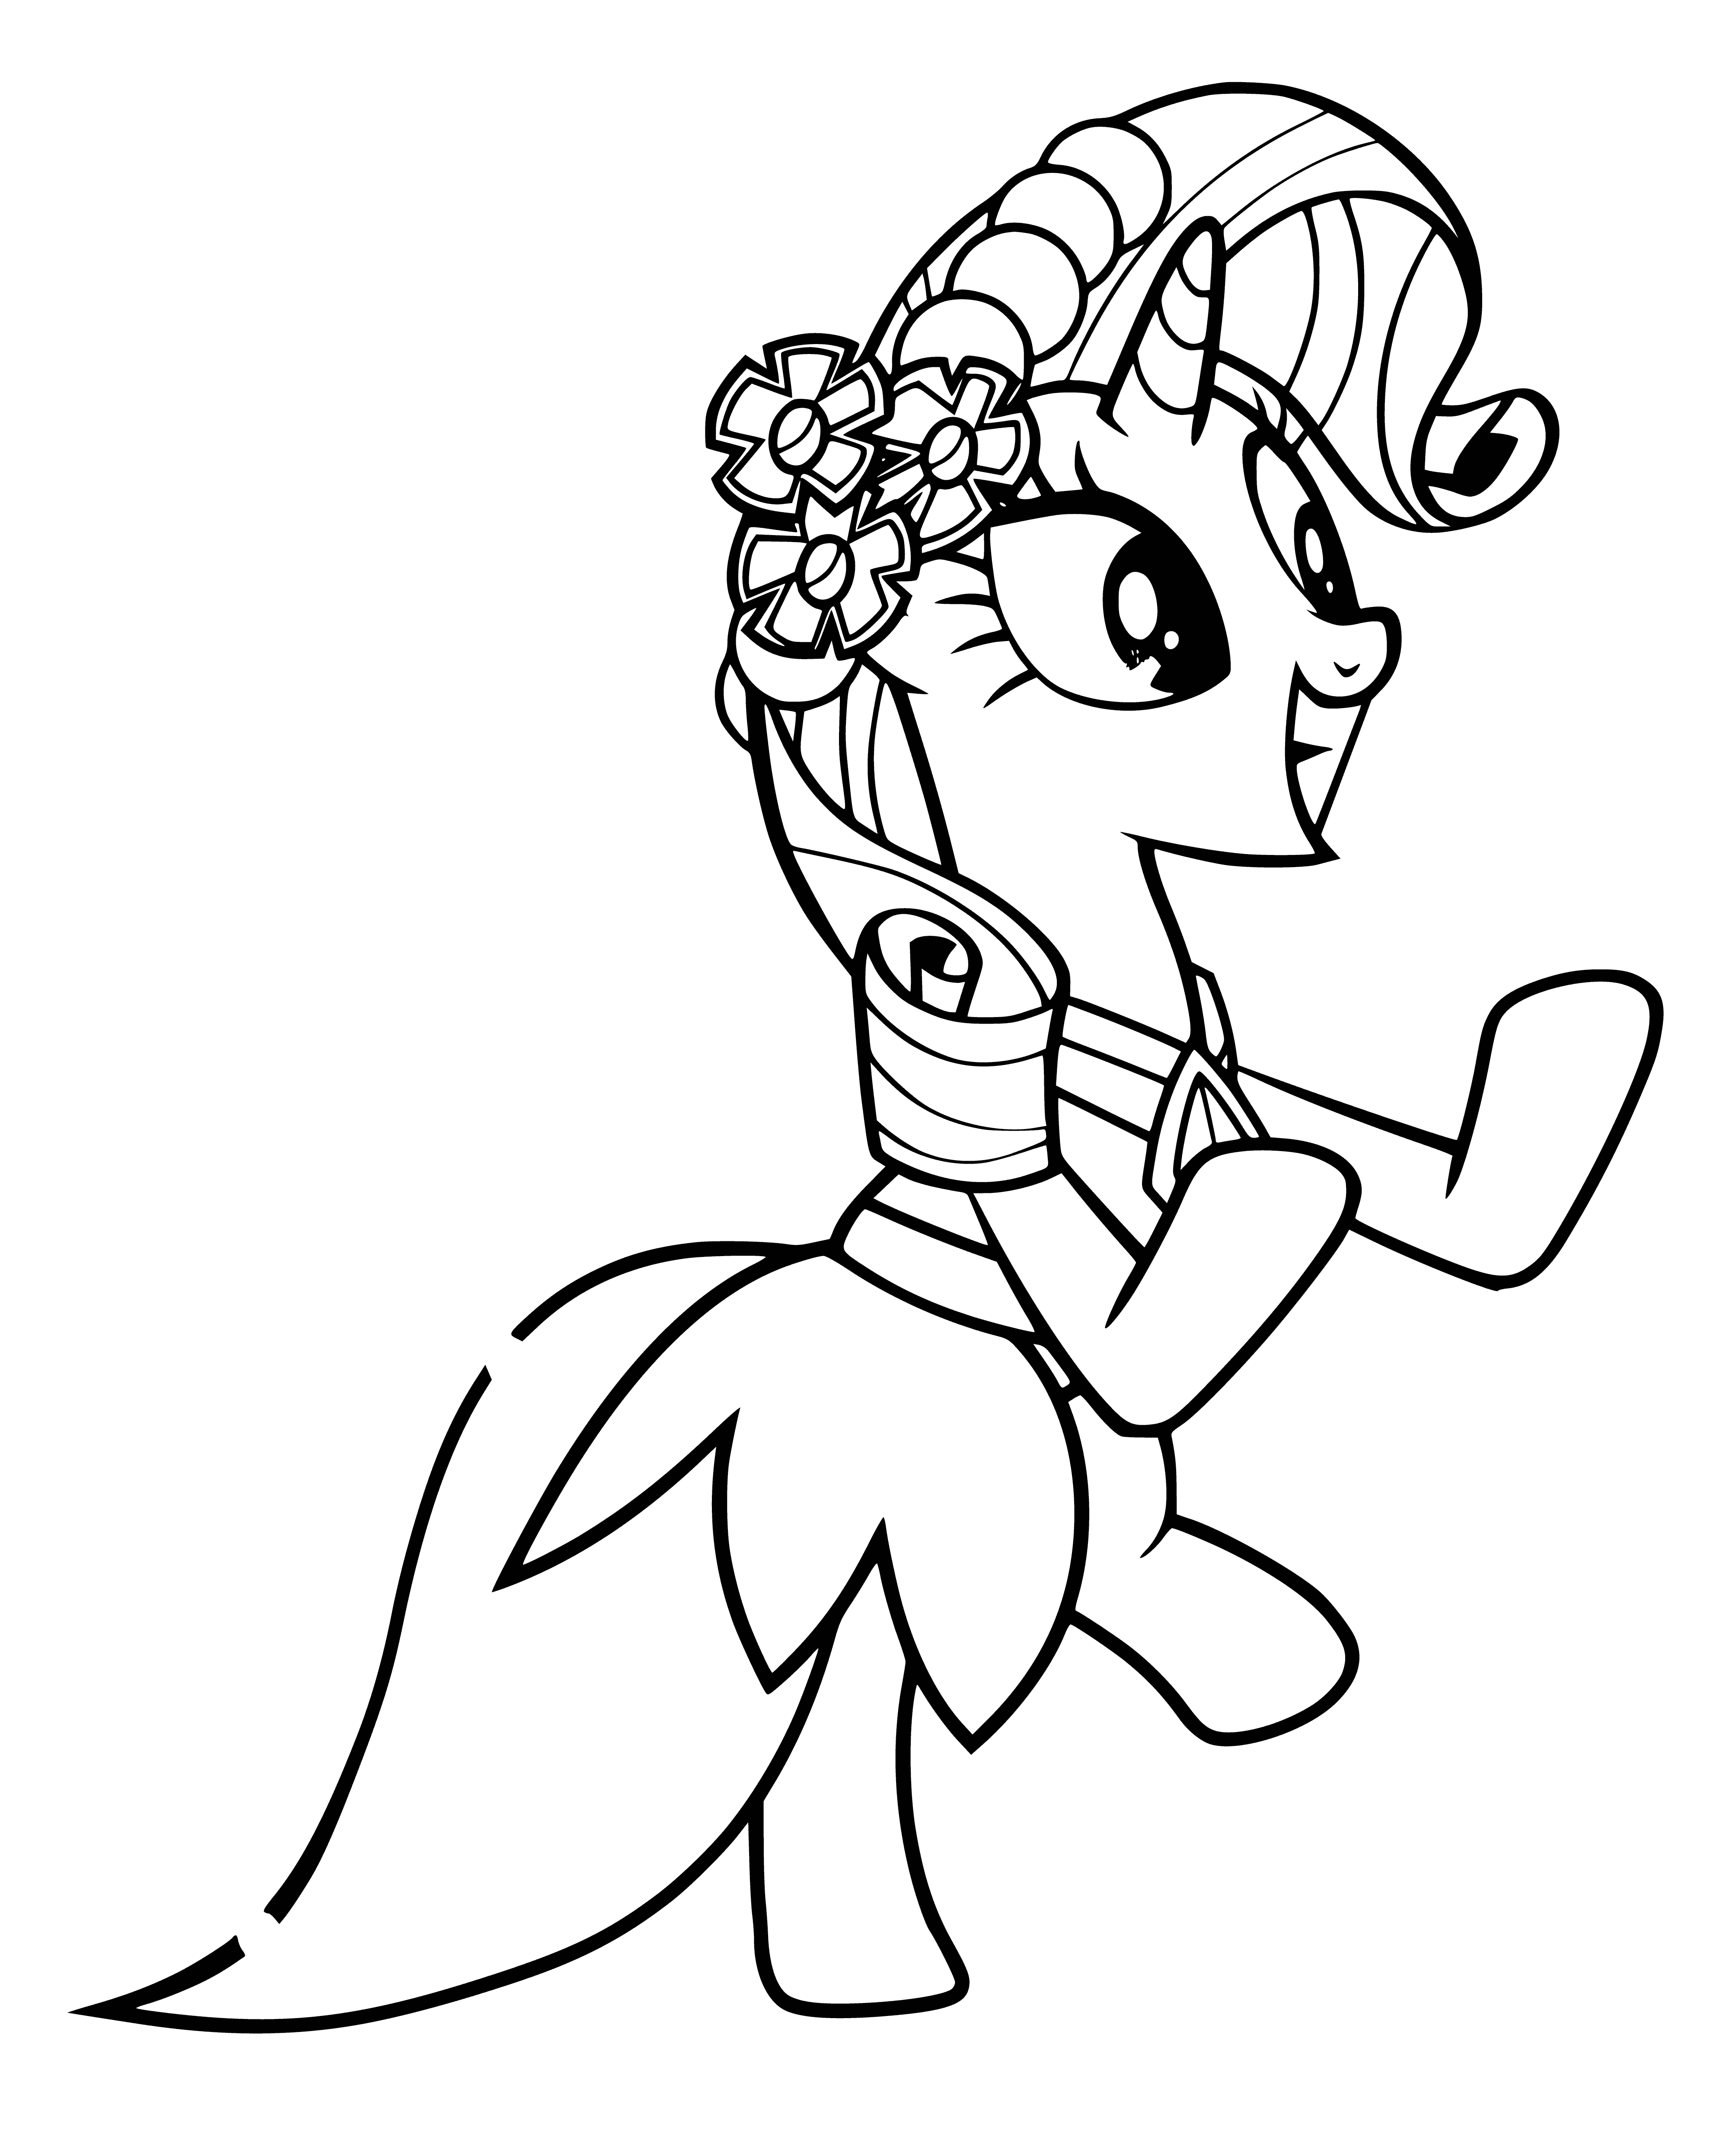 Rarity is surprised, wearing a tiara & necklace, light purple in her mane & tail with her hand to her chest and eyes wide. #MLPColoring